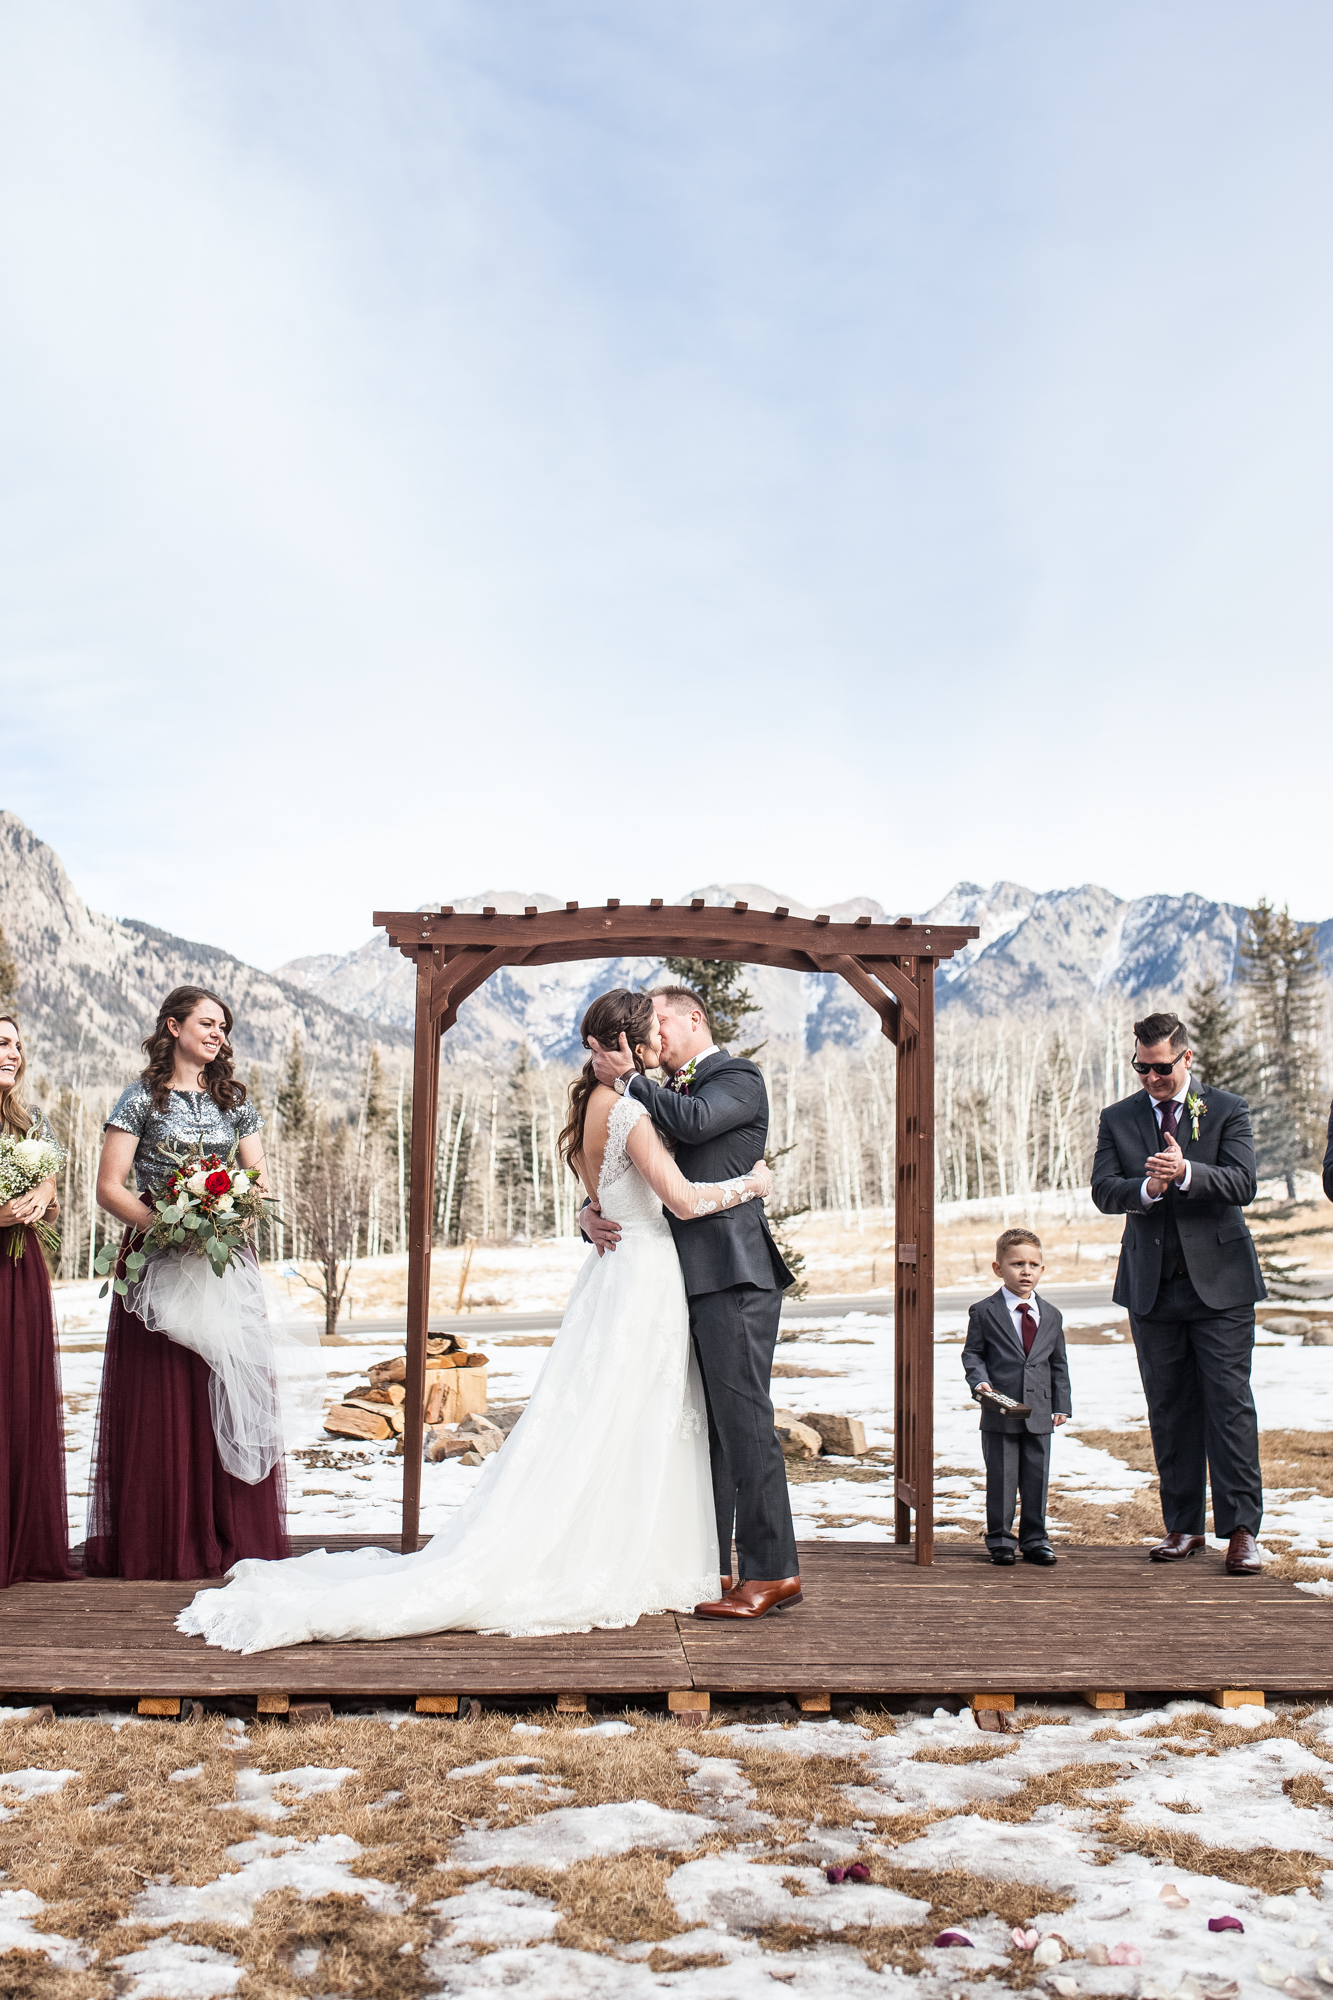 Durango, Colorado Winter Wedding ceremony first kiss as husband and wife, winter bride and groom